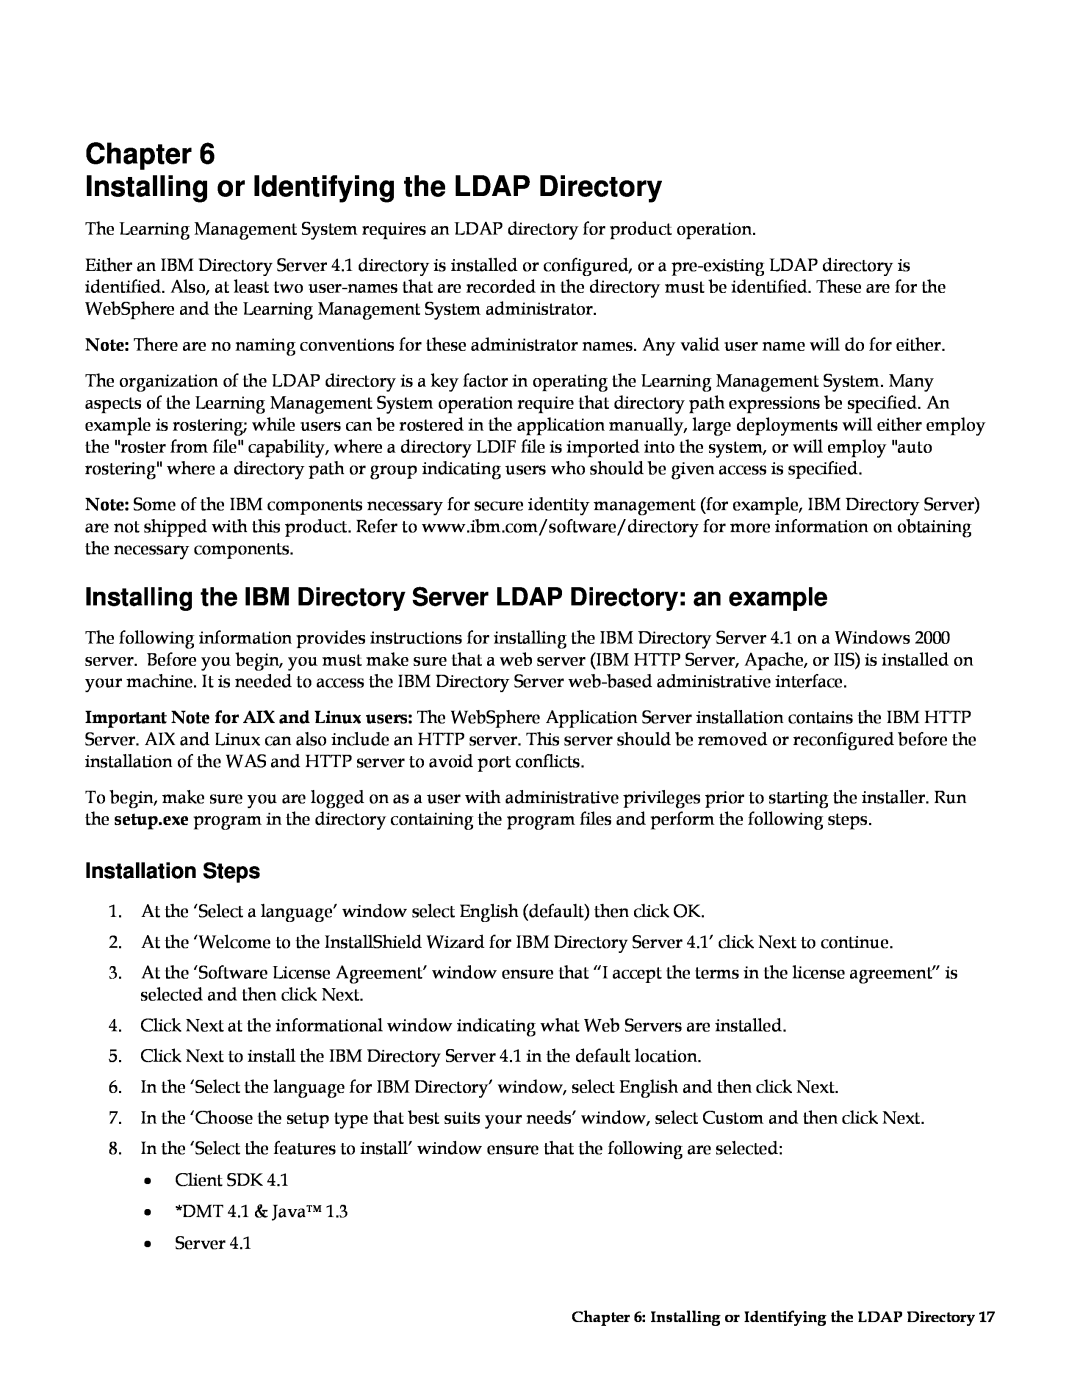 IBM G210-1784-00 manual Chapter Installing or Identifying the LDAP Directory, Installation Steps 